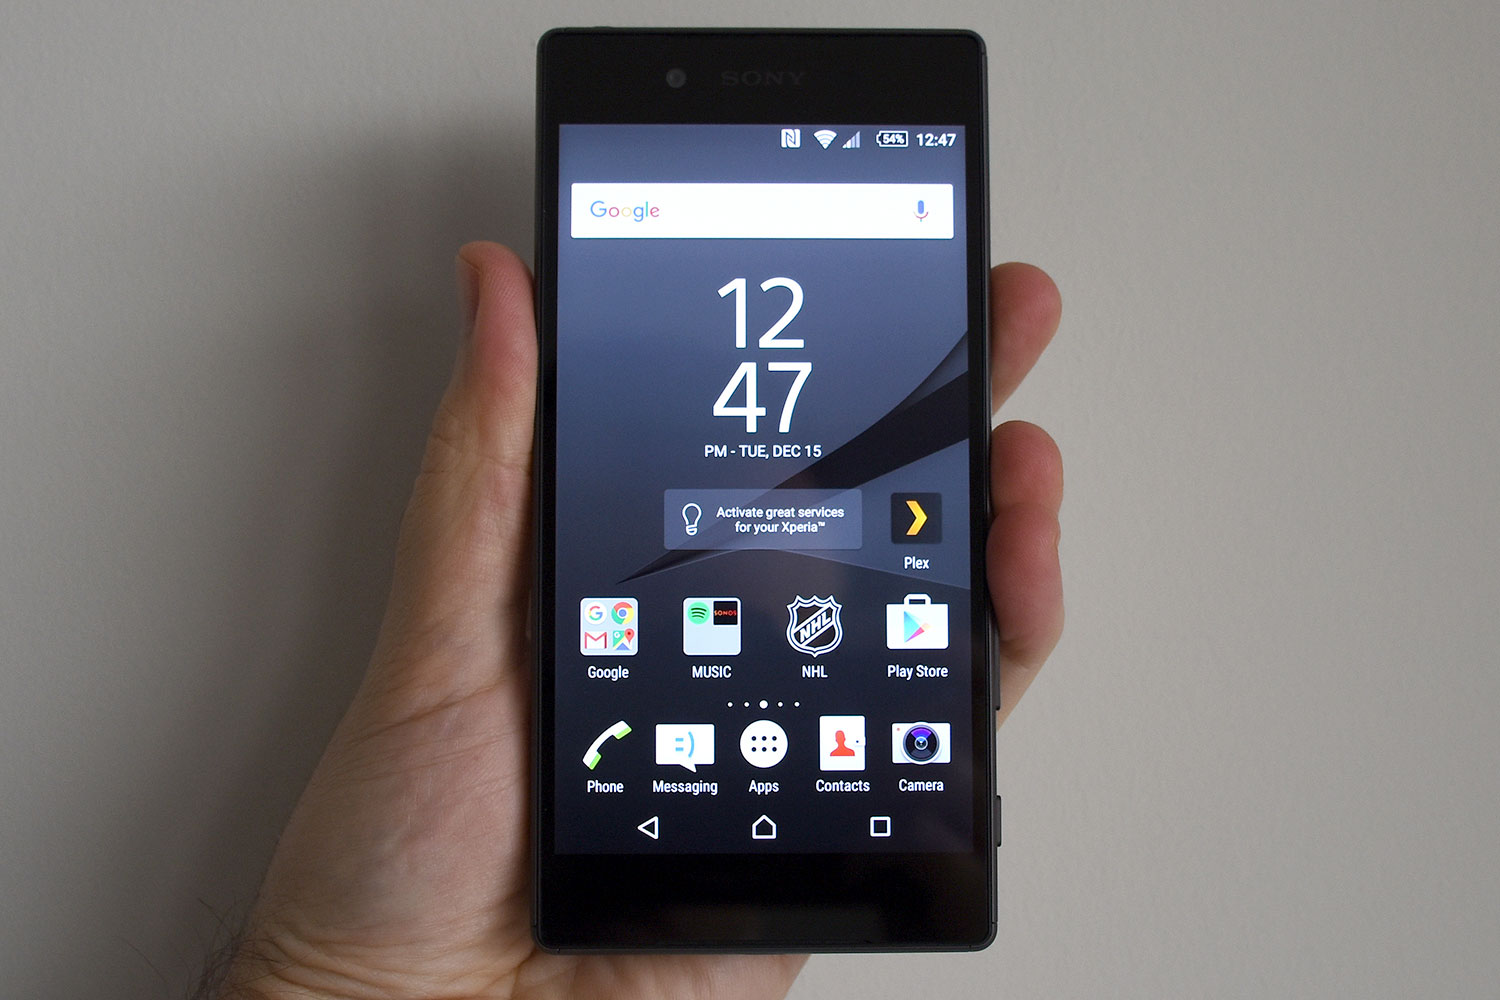 Sony Xperia Z5 | Full Review, Specs, Price, and More | Digital Trends